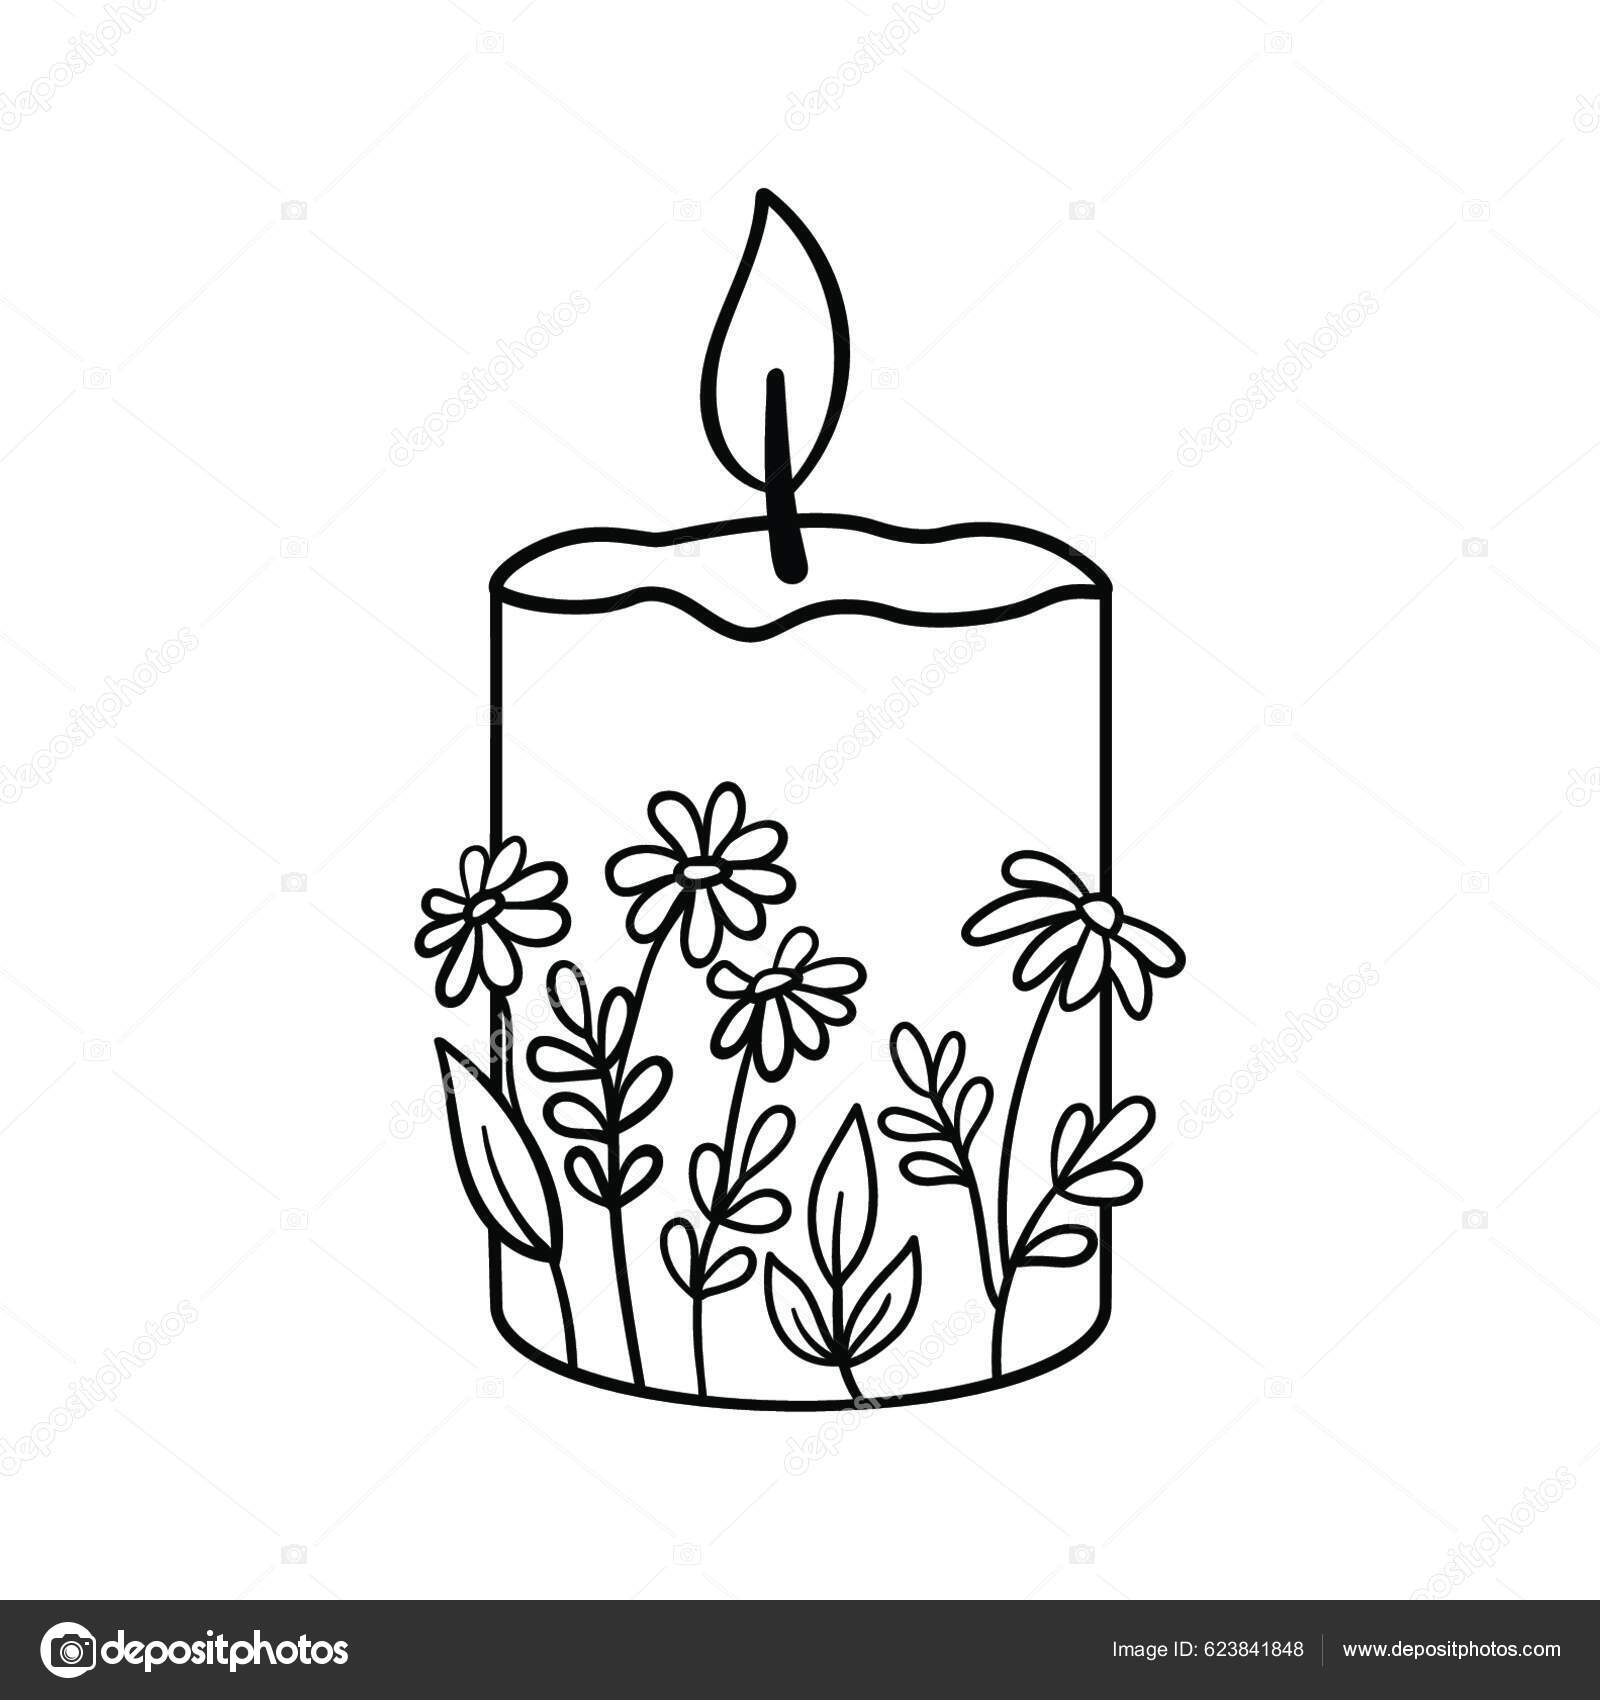 Easy Candle Drawing ✓ How to Draw a Candle Easy Step by Step - YouTube